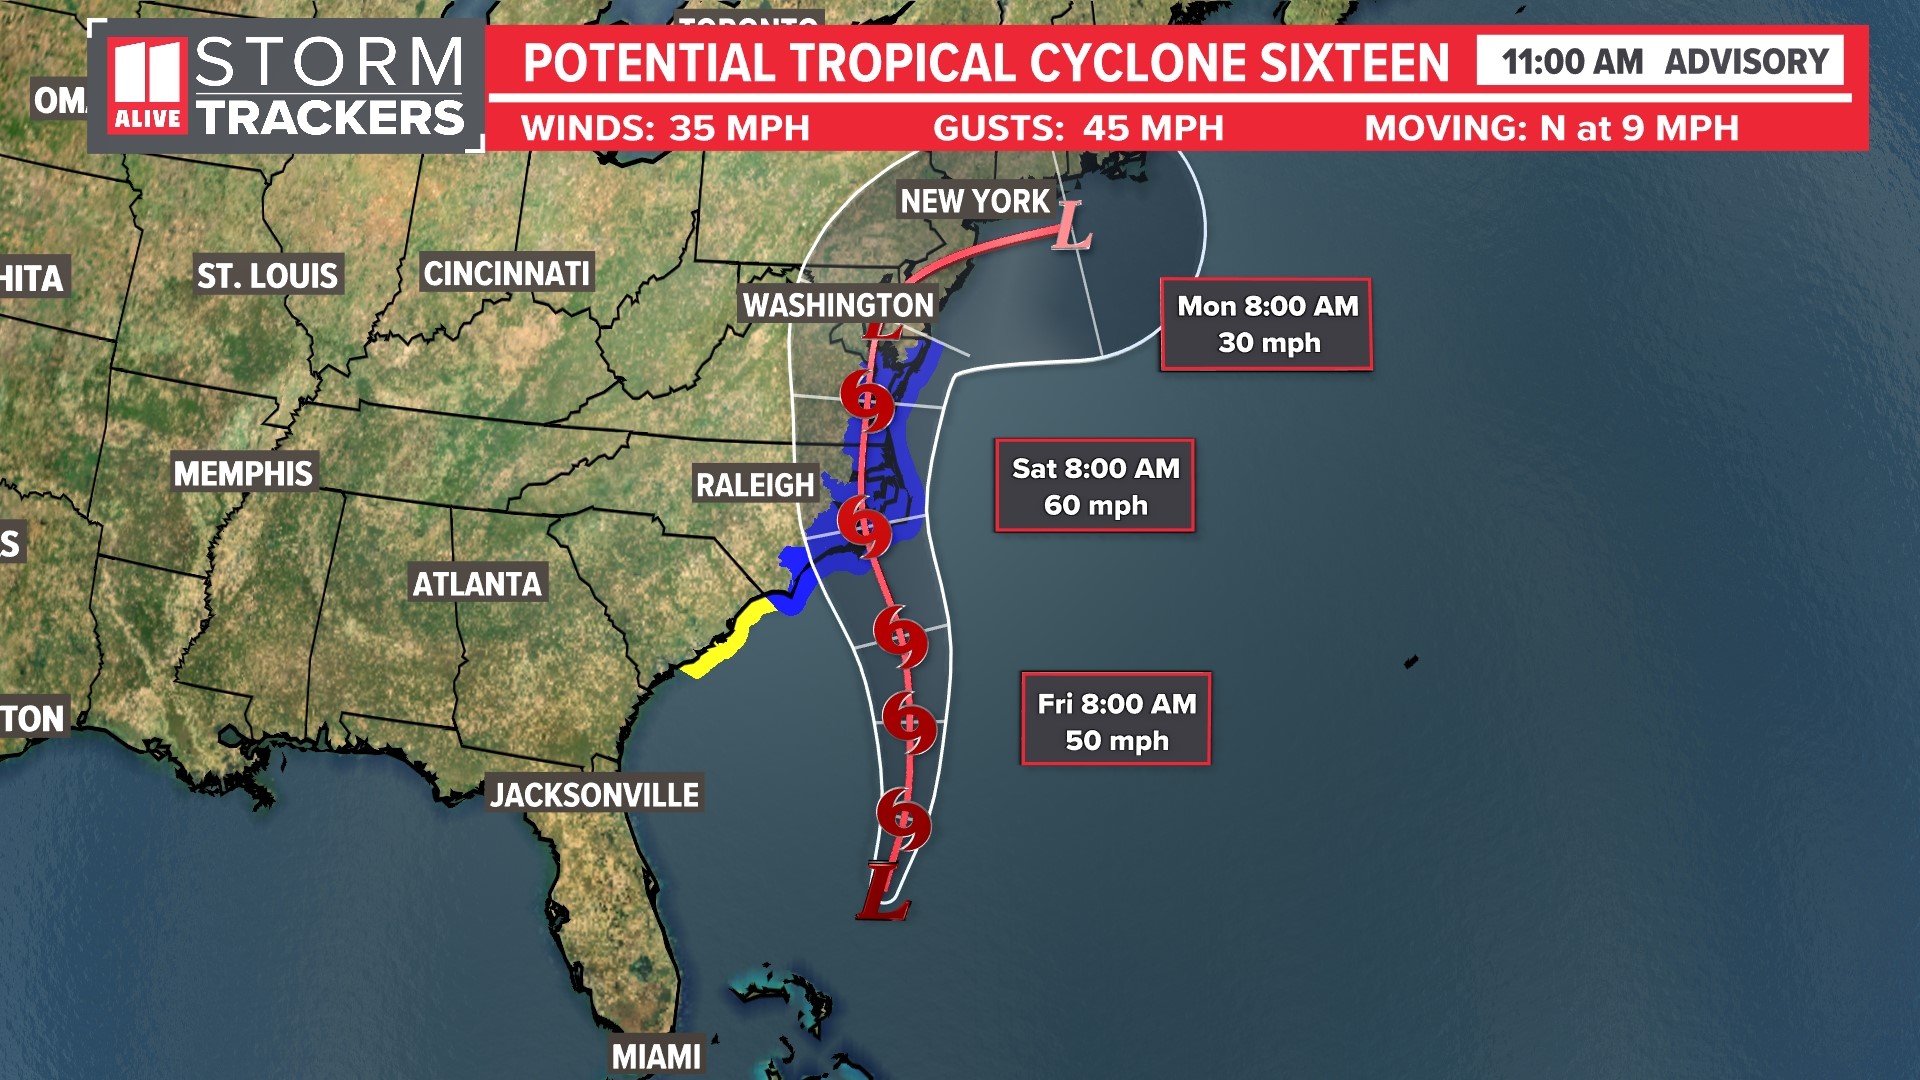 Potential Tropical Cyclone 16 has formed in the Atlantic and is forecast to impact the Carolinas over the next few days.